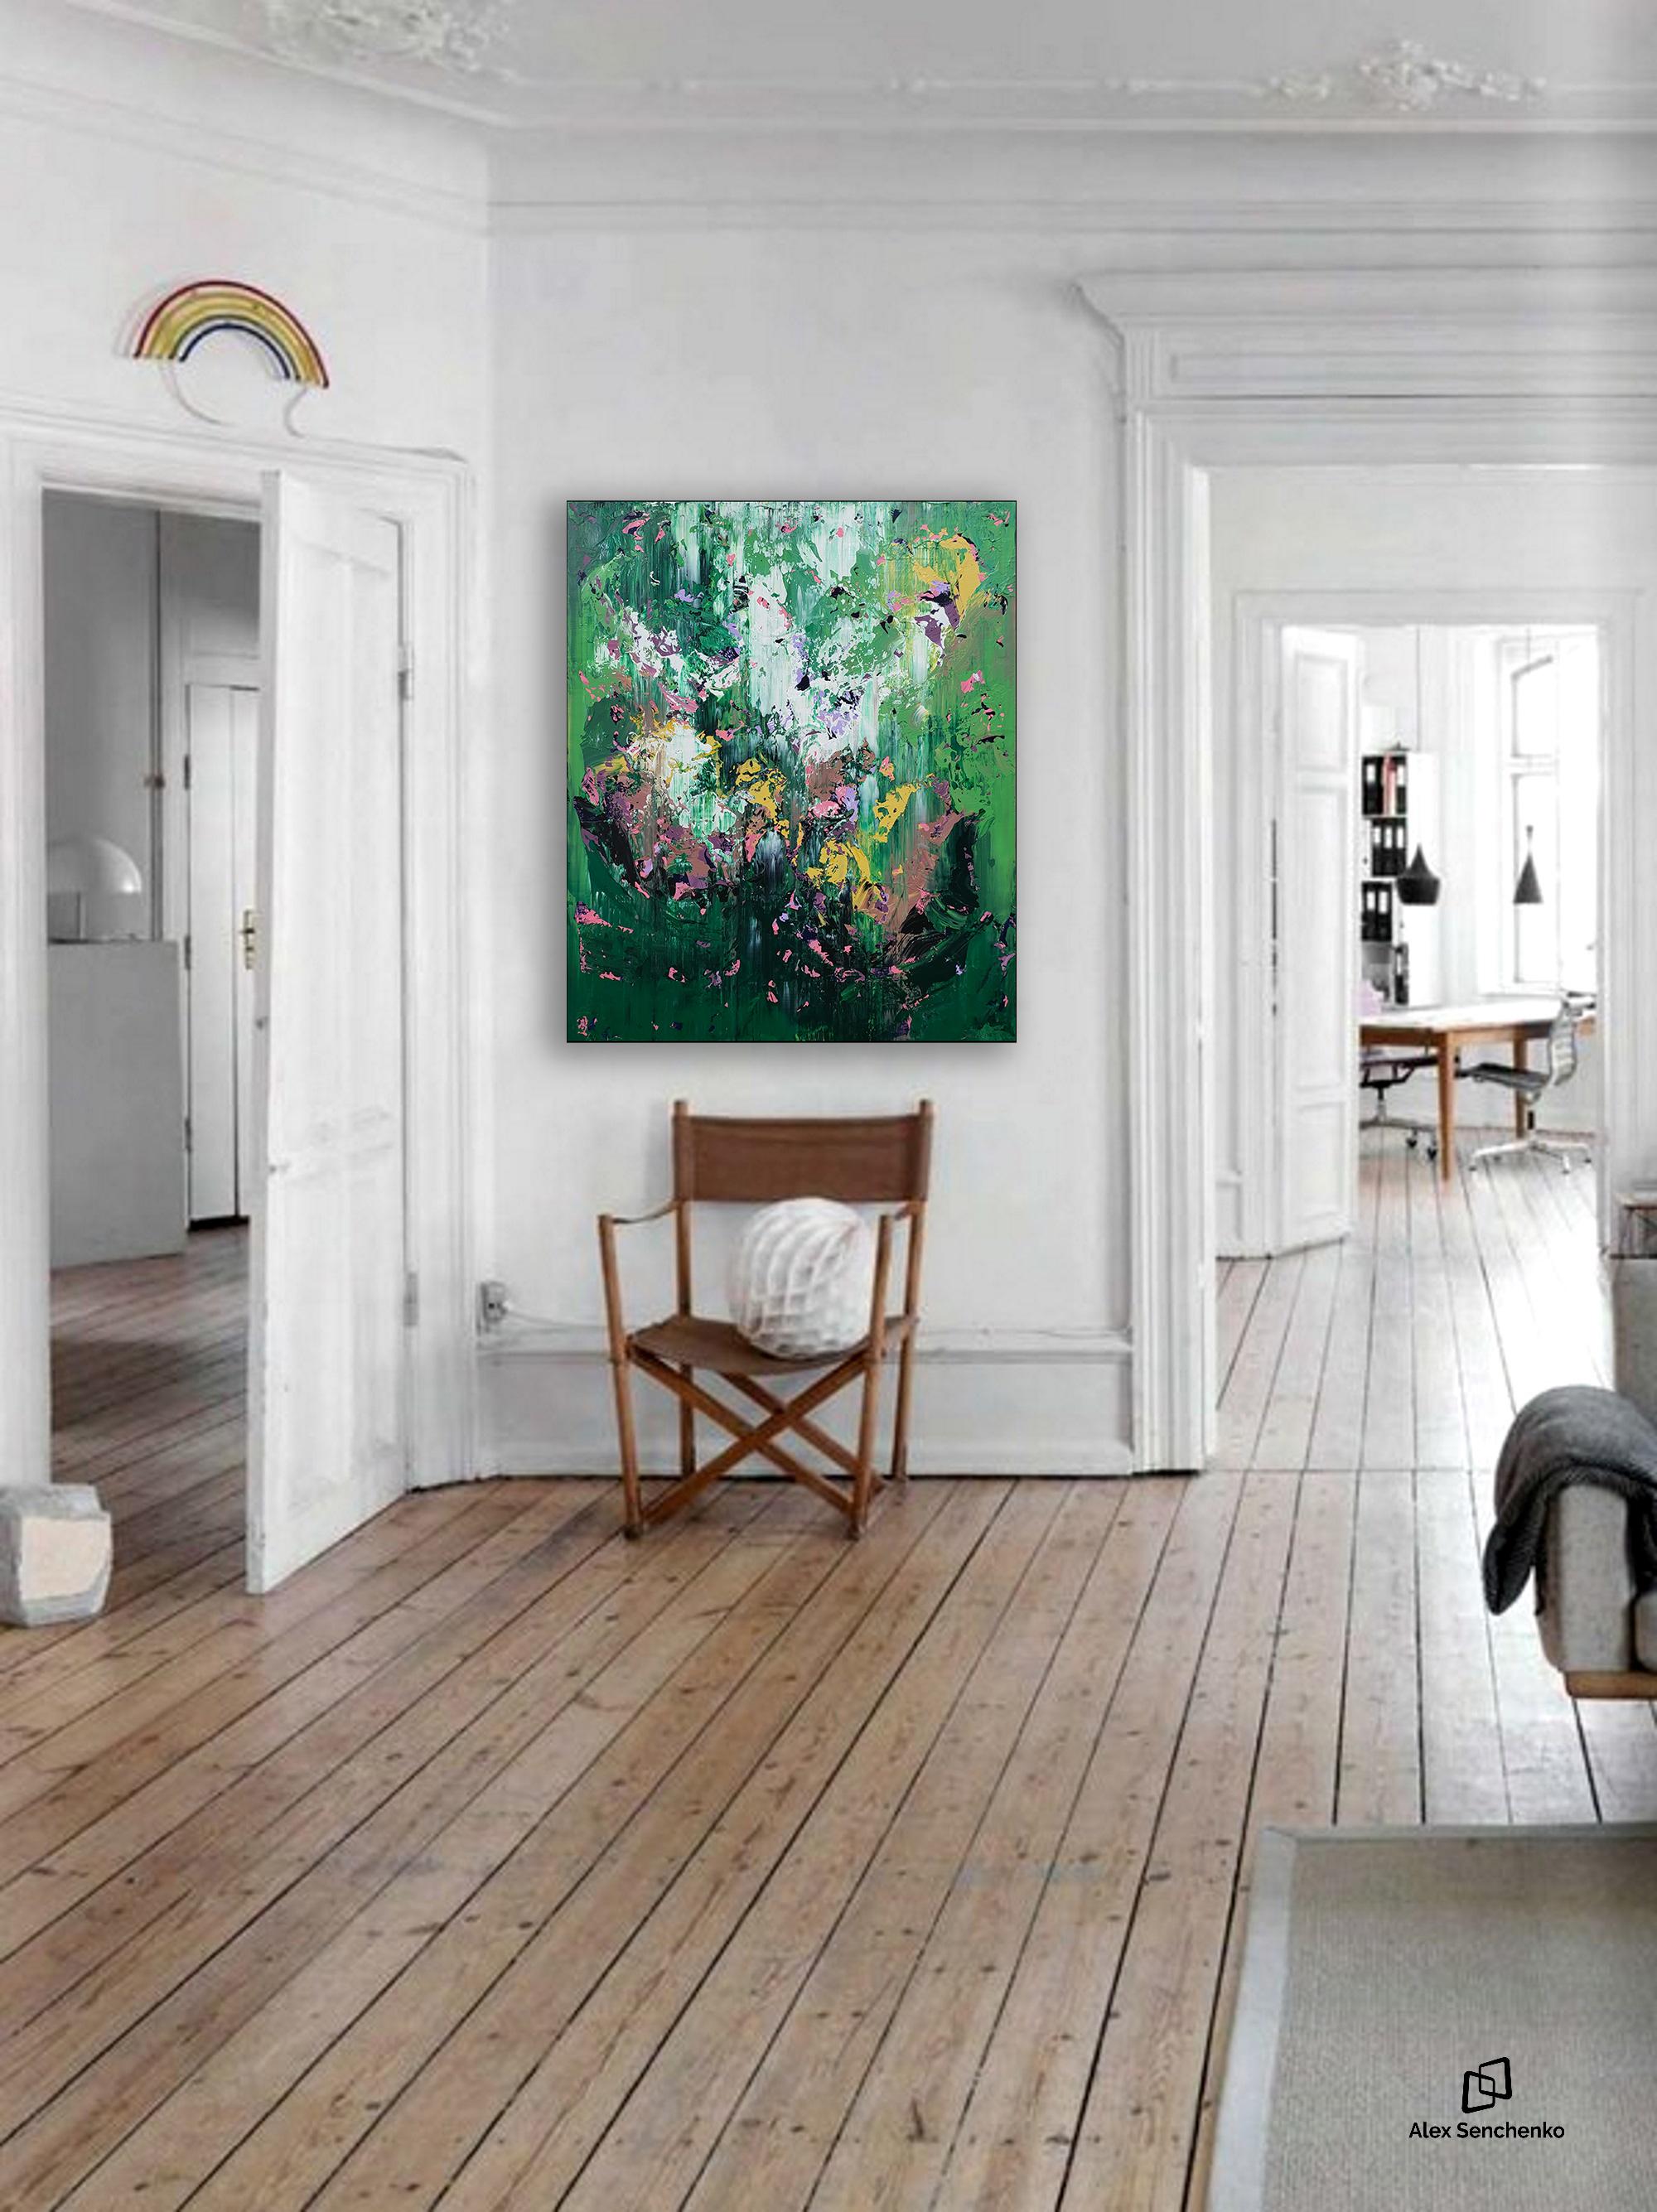 There’s something different about the homes of creative people. They like to surround themselves with inspiring things, from unique tablecloths to the incredible paintings on the walls.
Alex Senchenko’s - Abstract 22168 - can give your home that